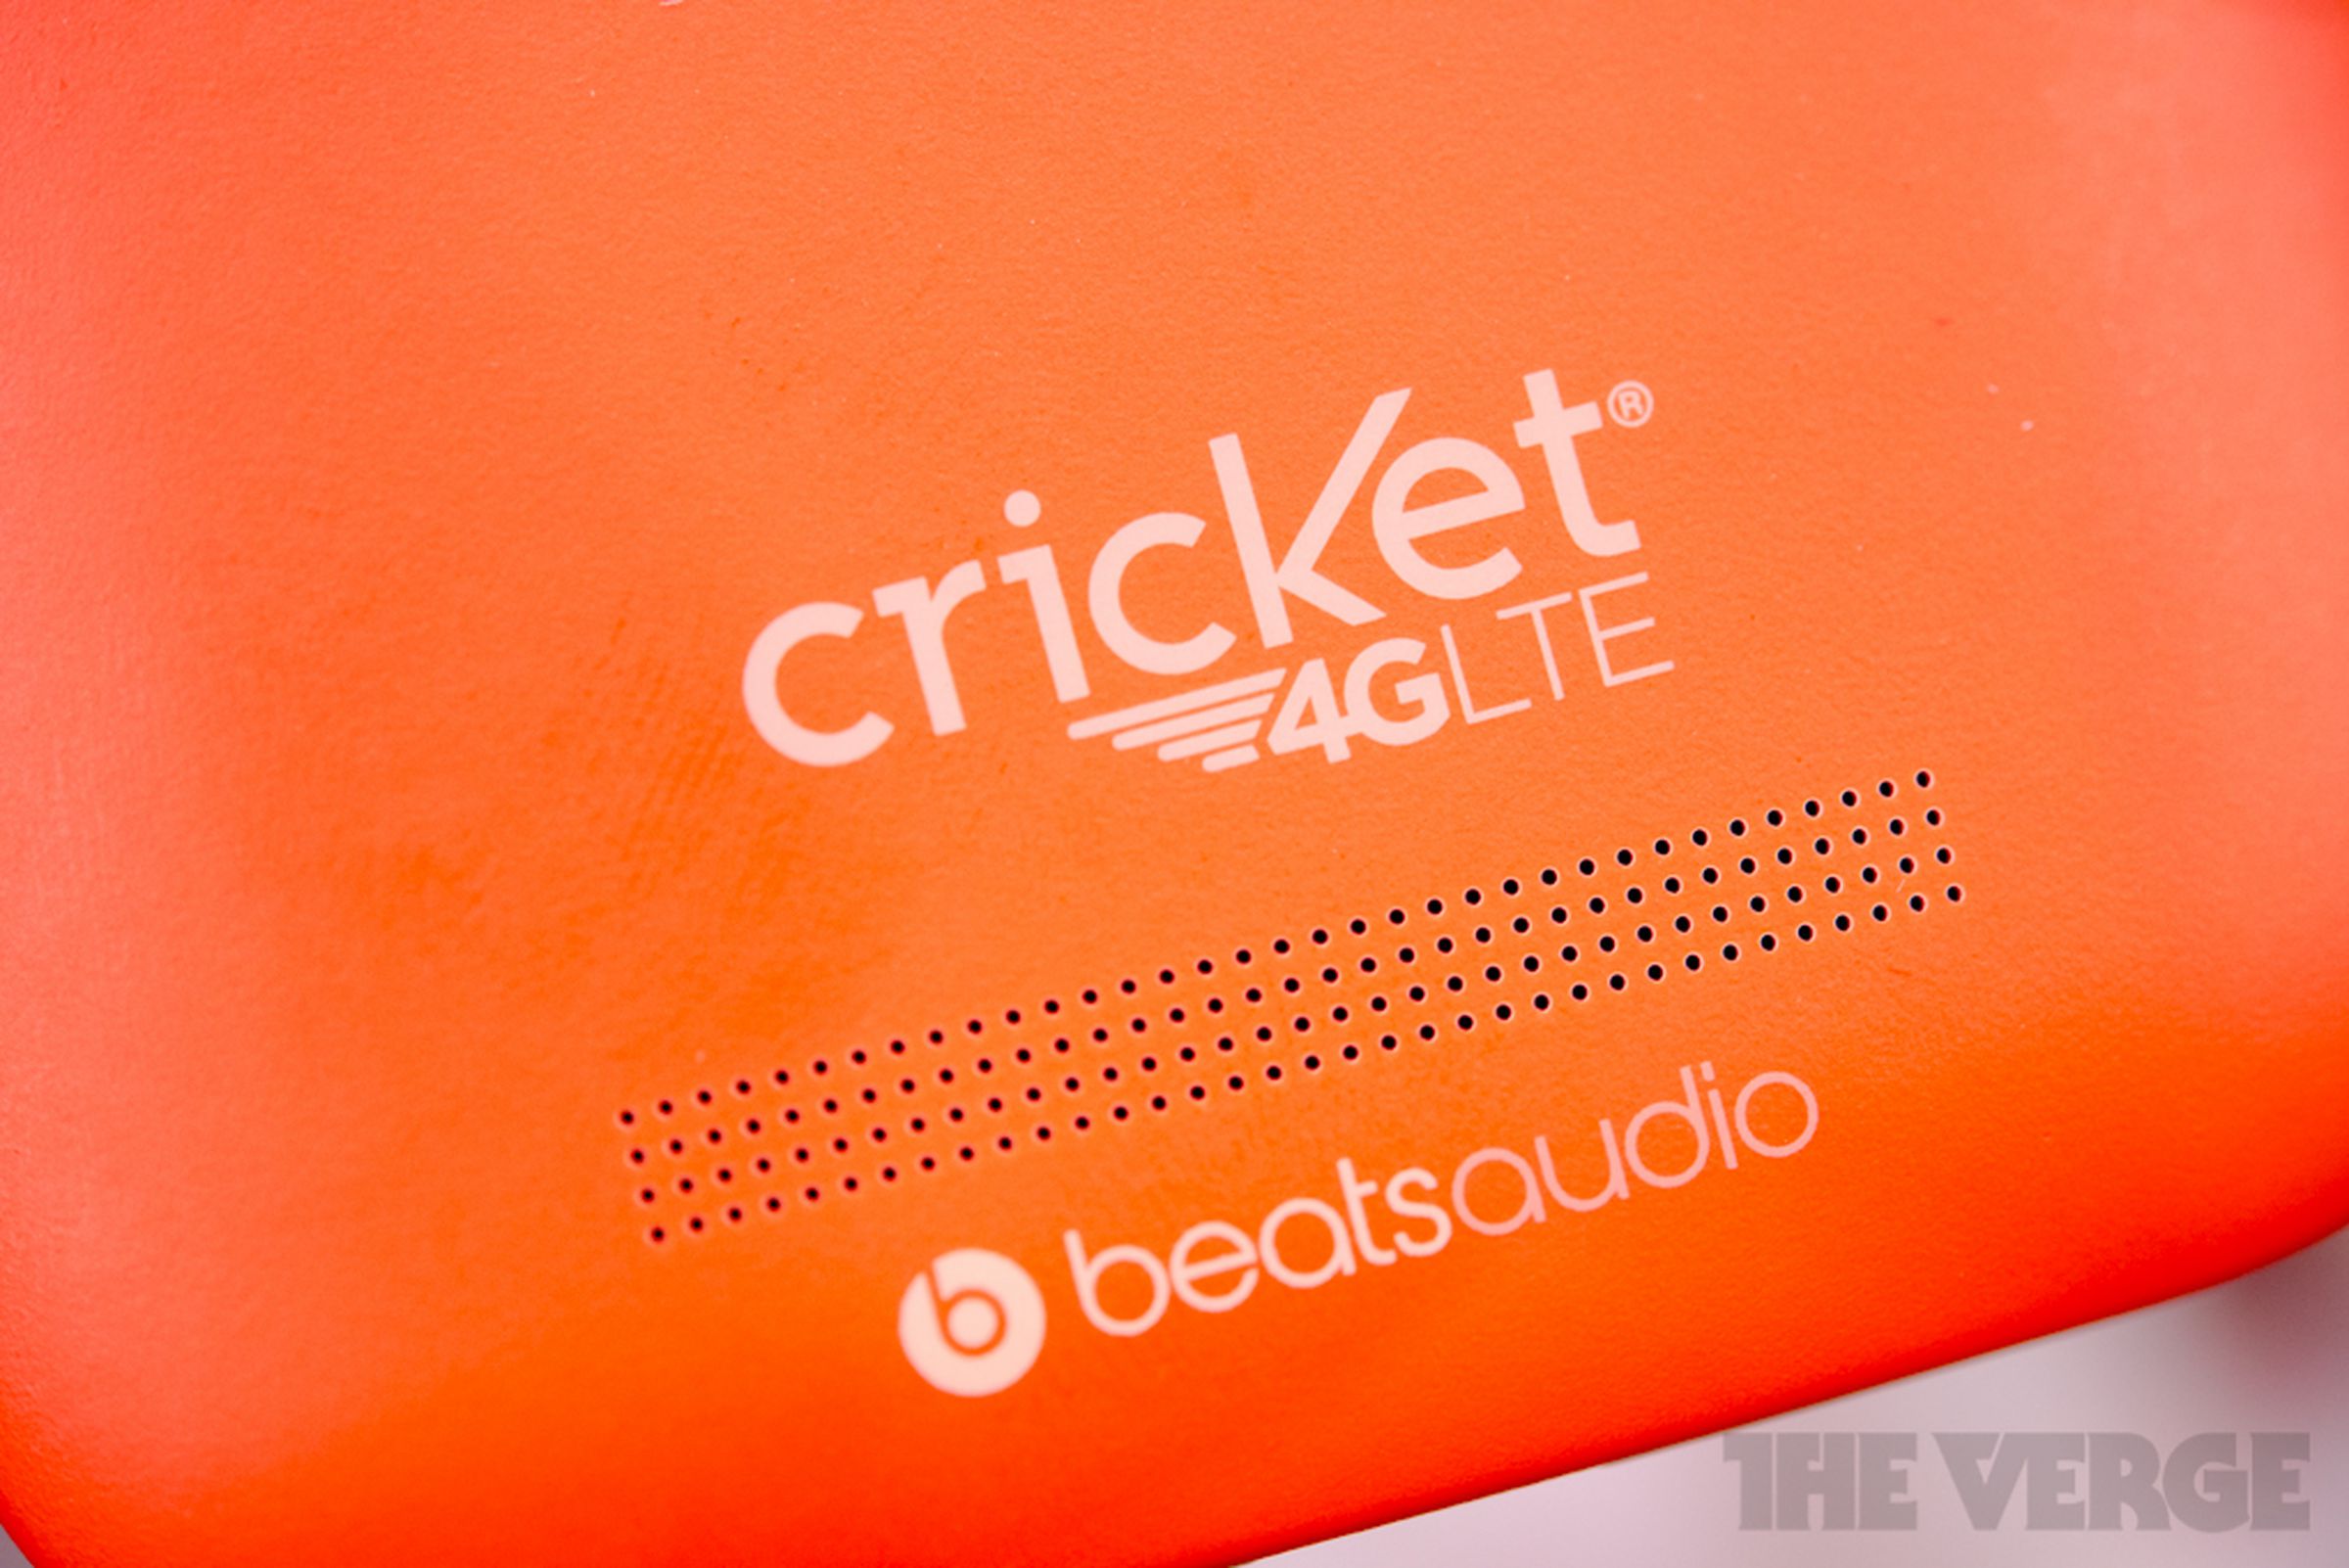 HTC One SV for Cricket hands-on photos